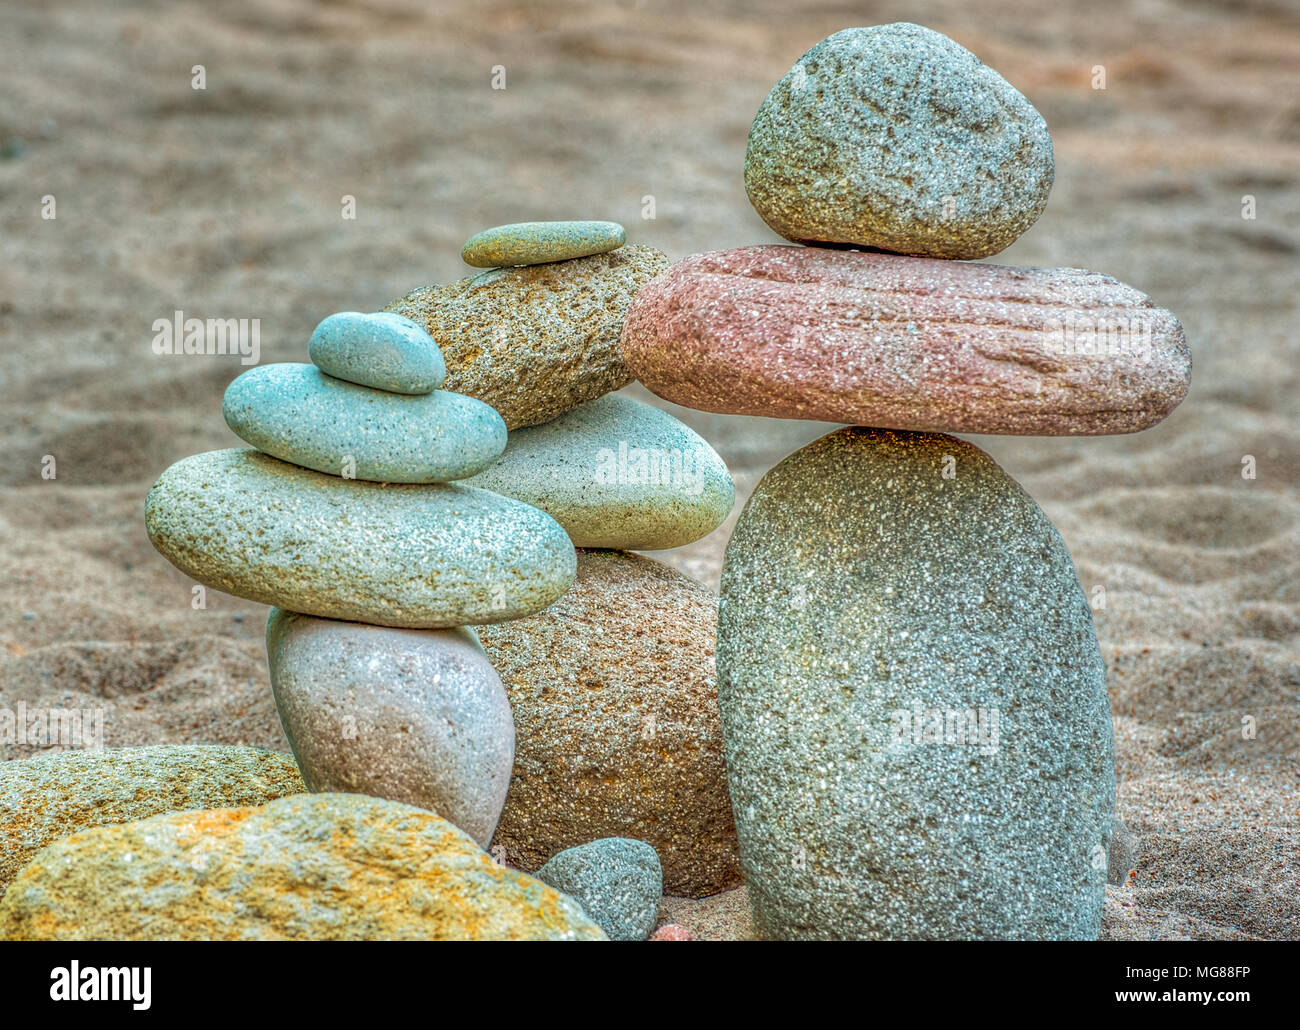 A grouping of stacked river rock found on the banks of the Sandy River at Oxbow Park near Gresham, Oregon.  A section of the beach is filled with stac Stock Photo